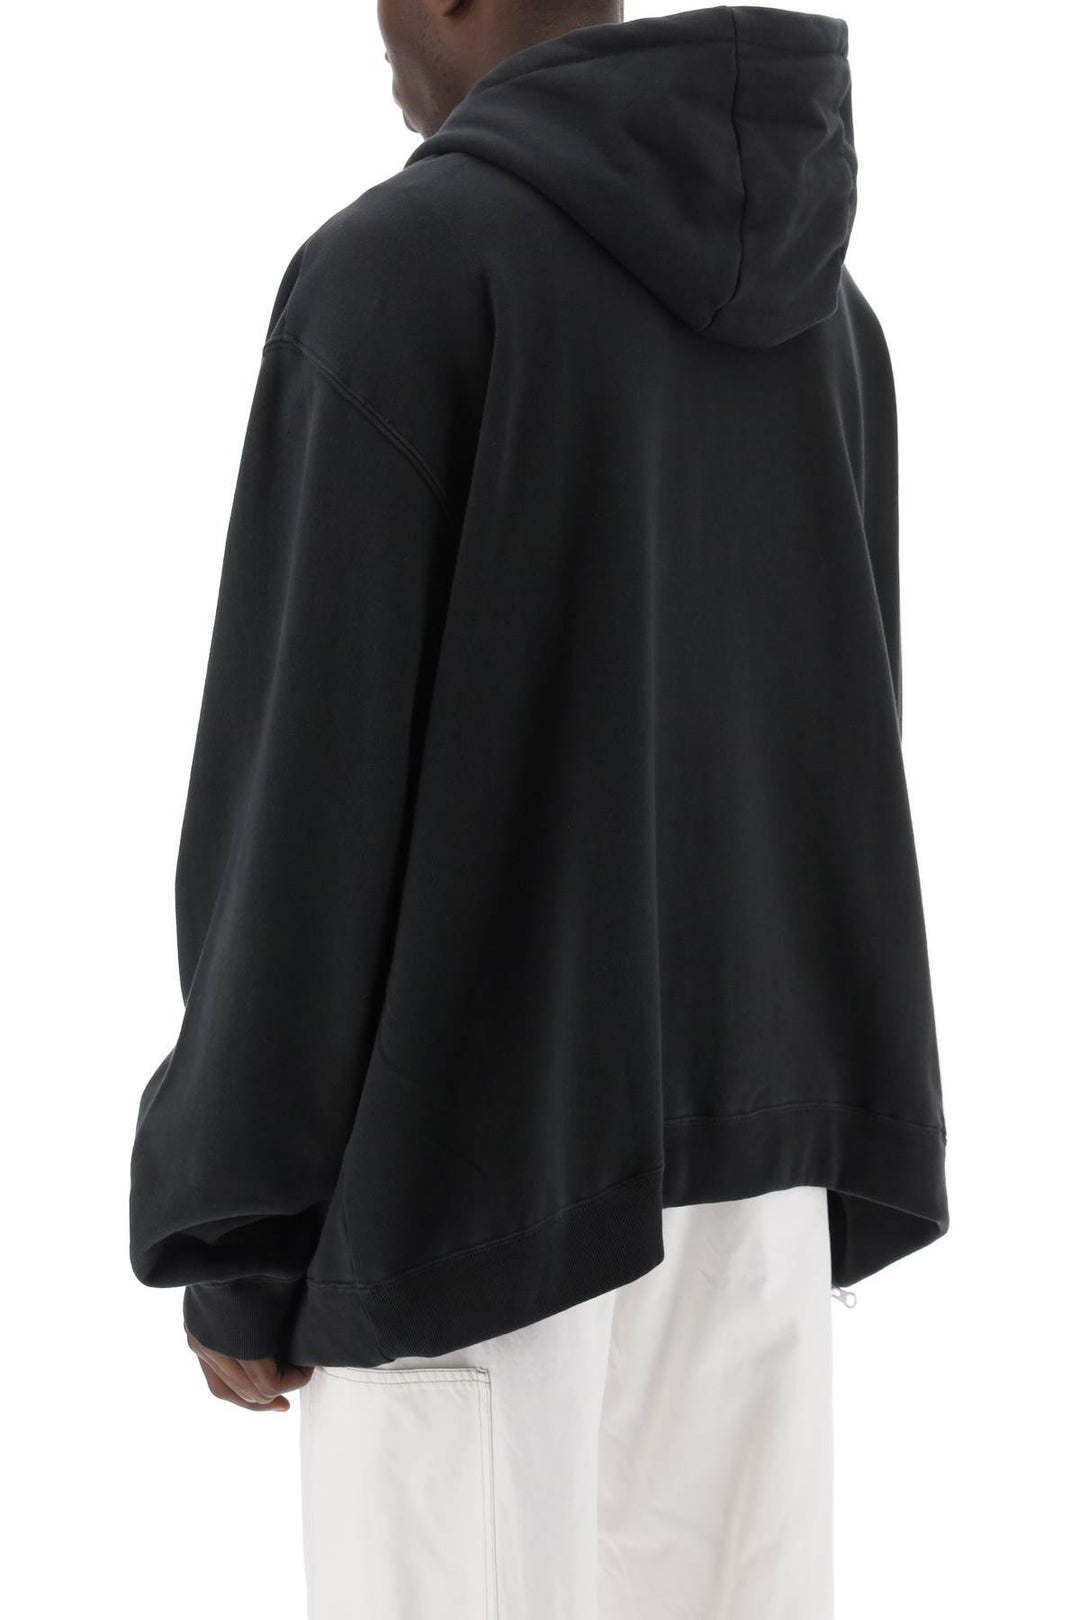 Maison Margiela Replace With Double Quotemaxi Zip Up Sweatshirt With   Nero